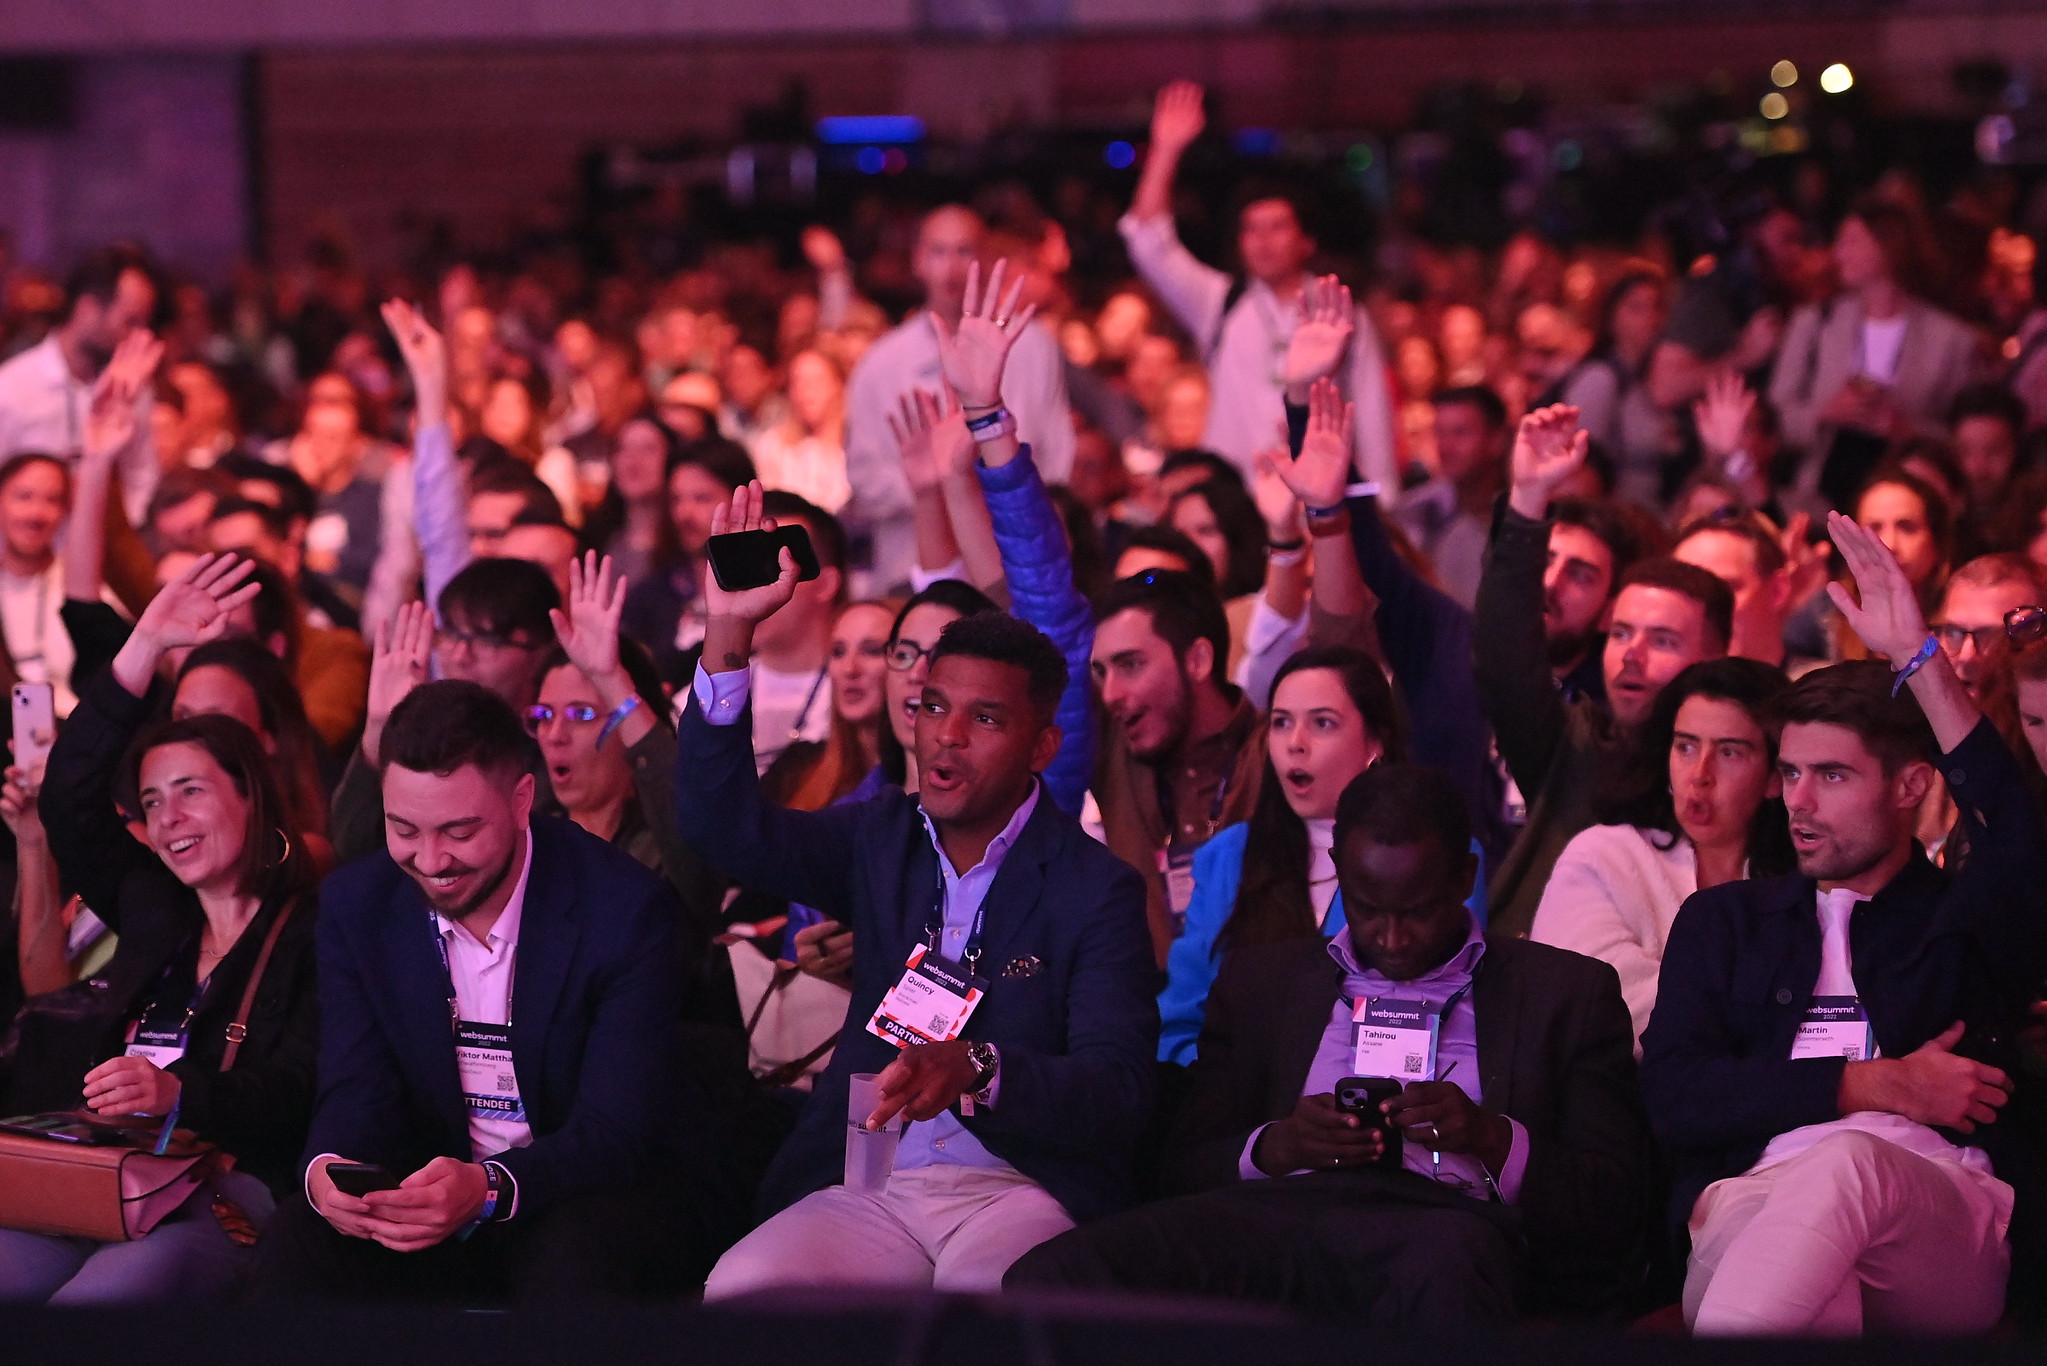 A crowd of dozens of attendees raise their hands as they face the Centre Stage at Web Summit 2022 at the Altice Arena in Lisbon